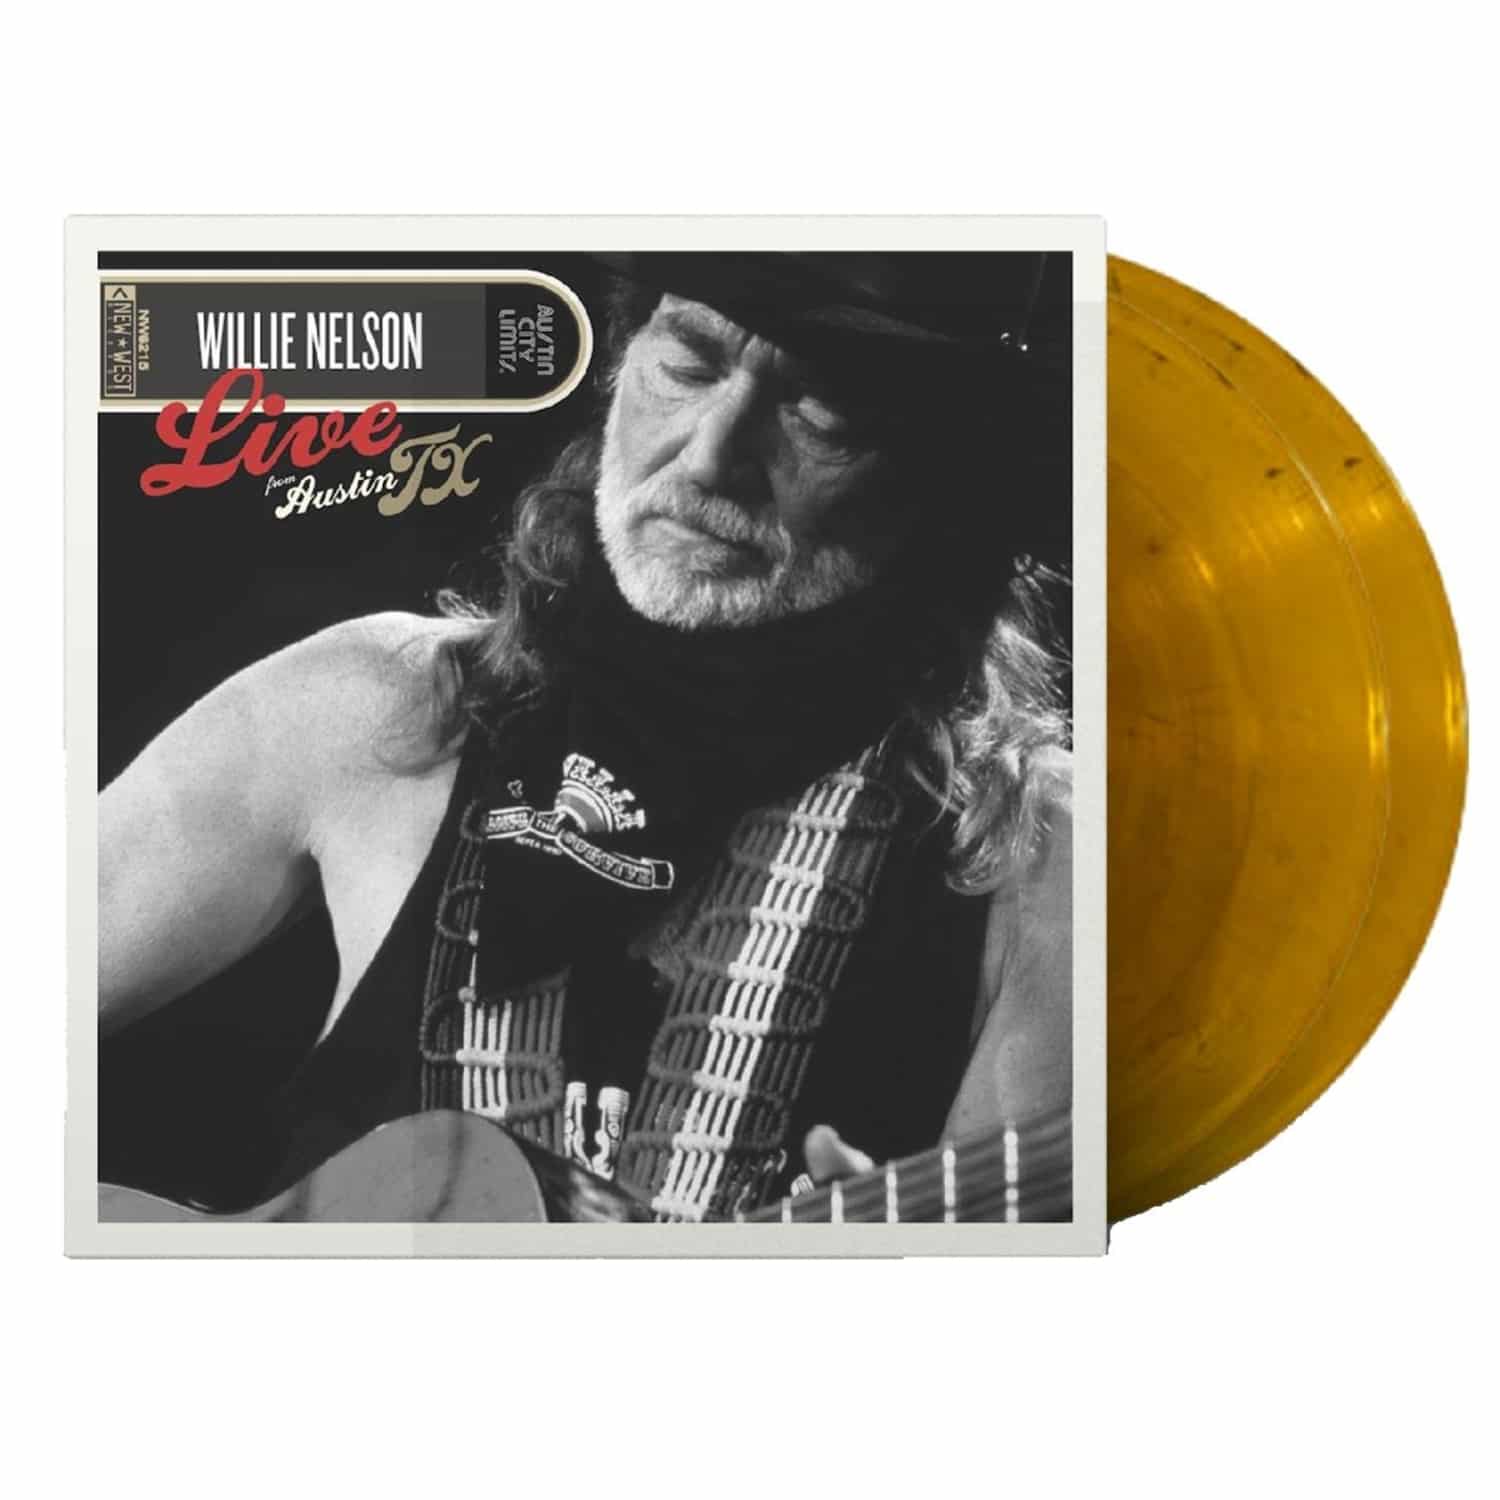 Willie Nelson - LIVE FROM AUSTIN, TX 